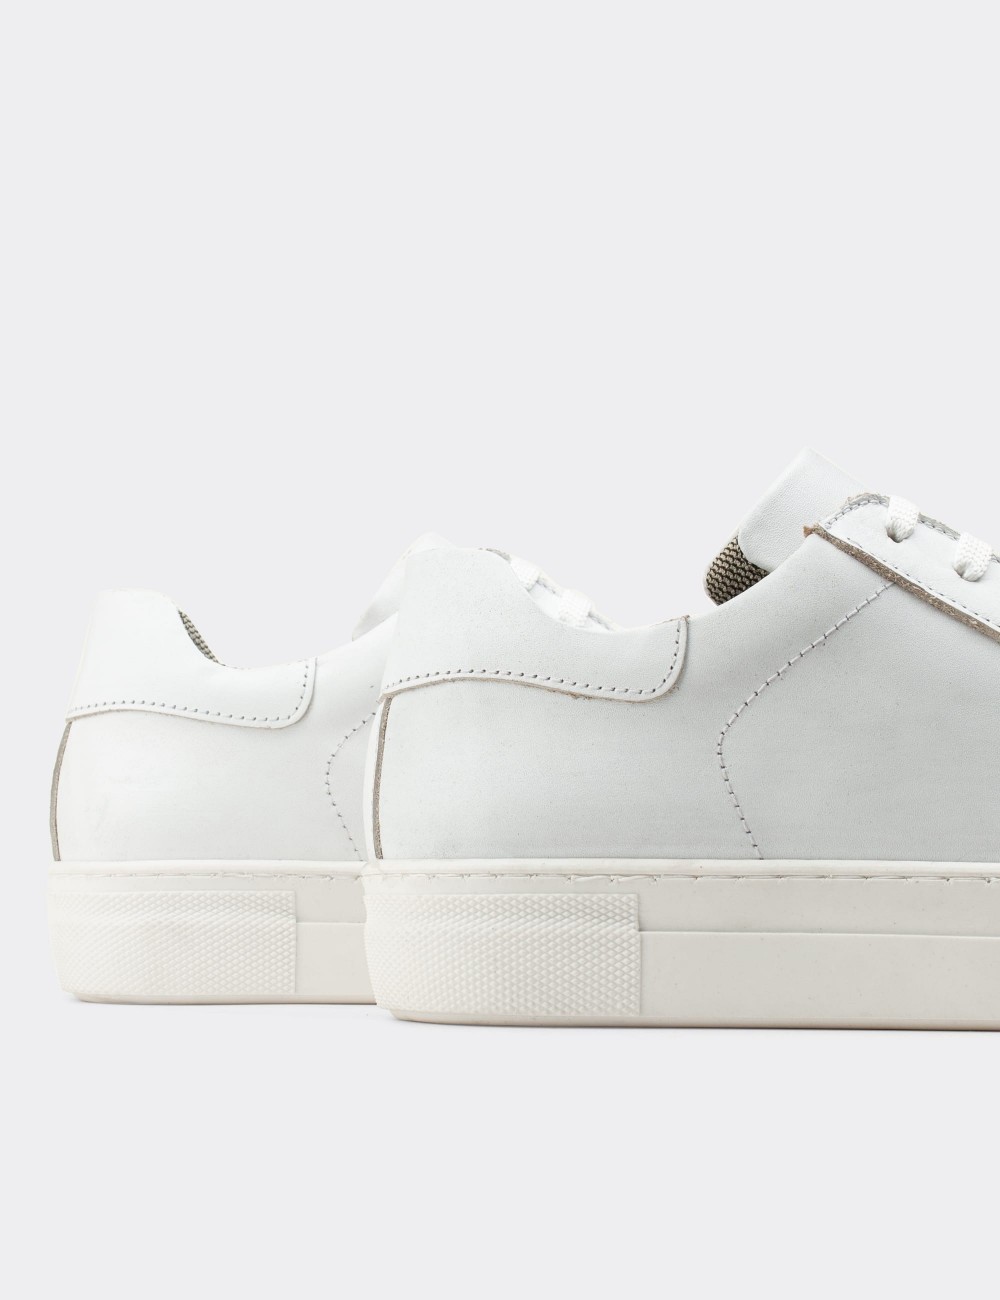 White  Leather Sneakers - Z1681ZBYZC01